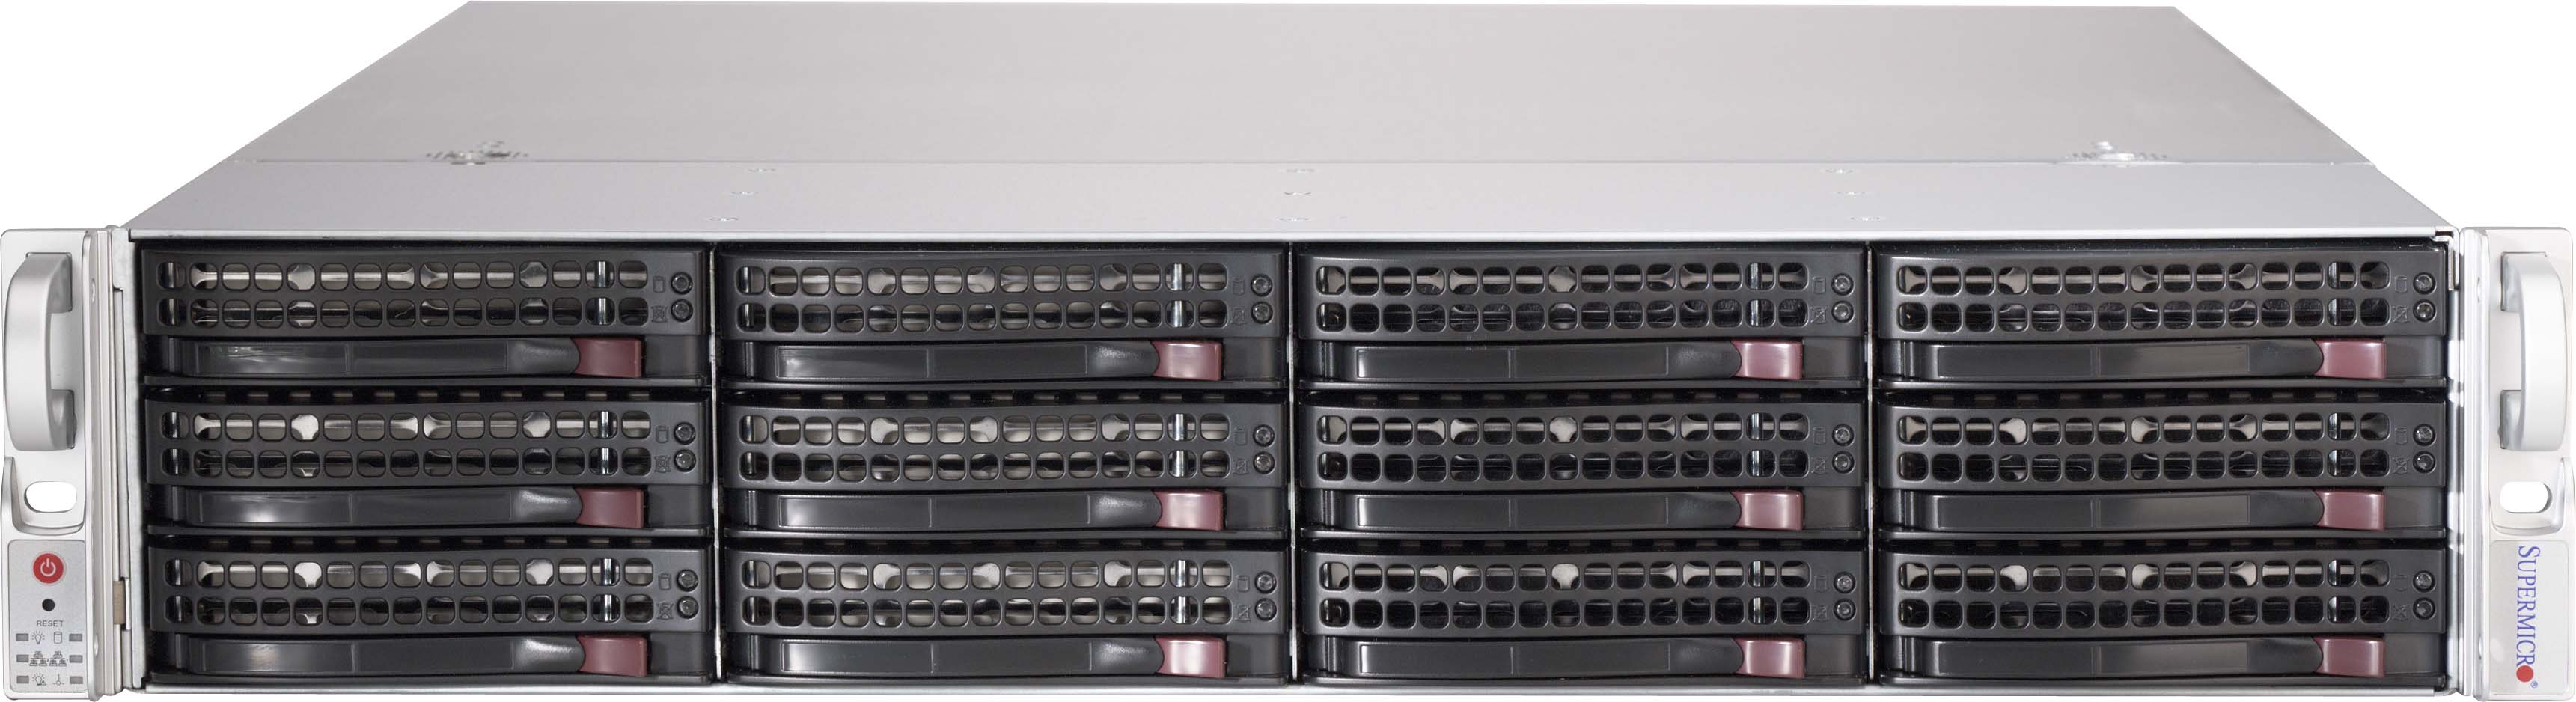 Supermicro SuperChassis 826BE1C-R741JBOD